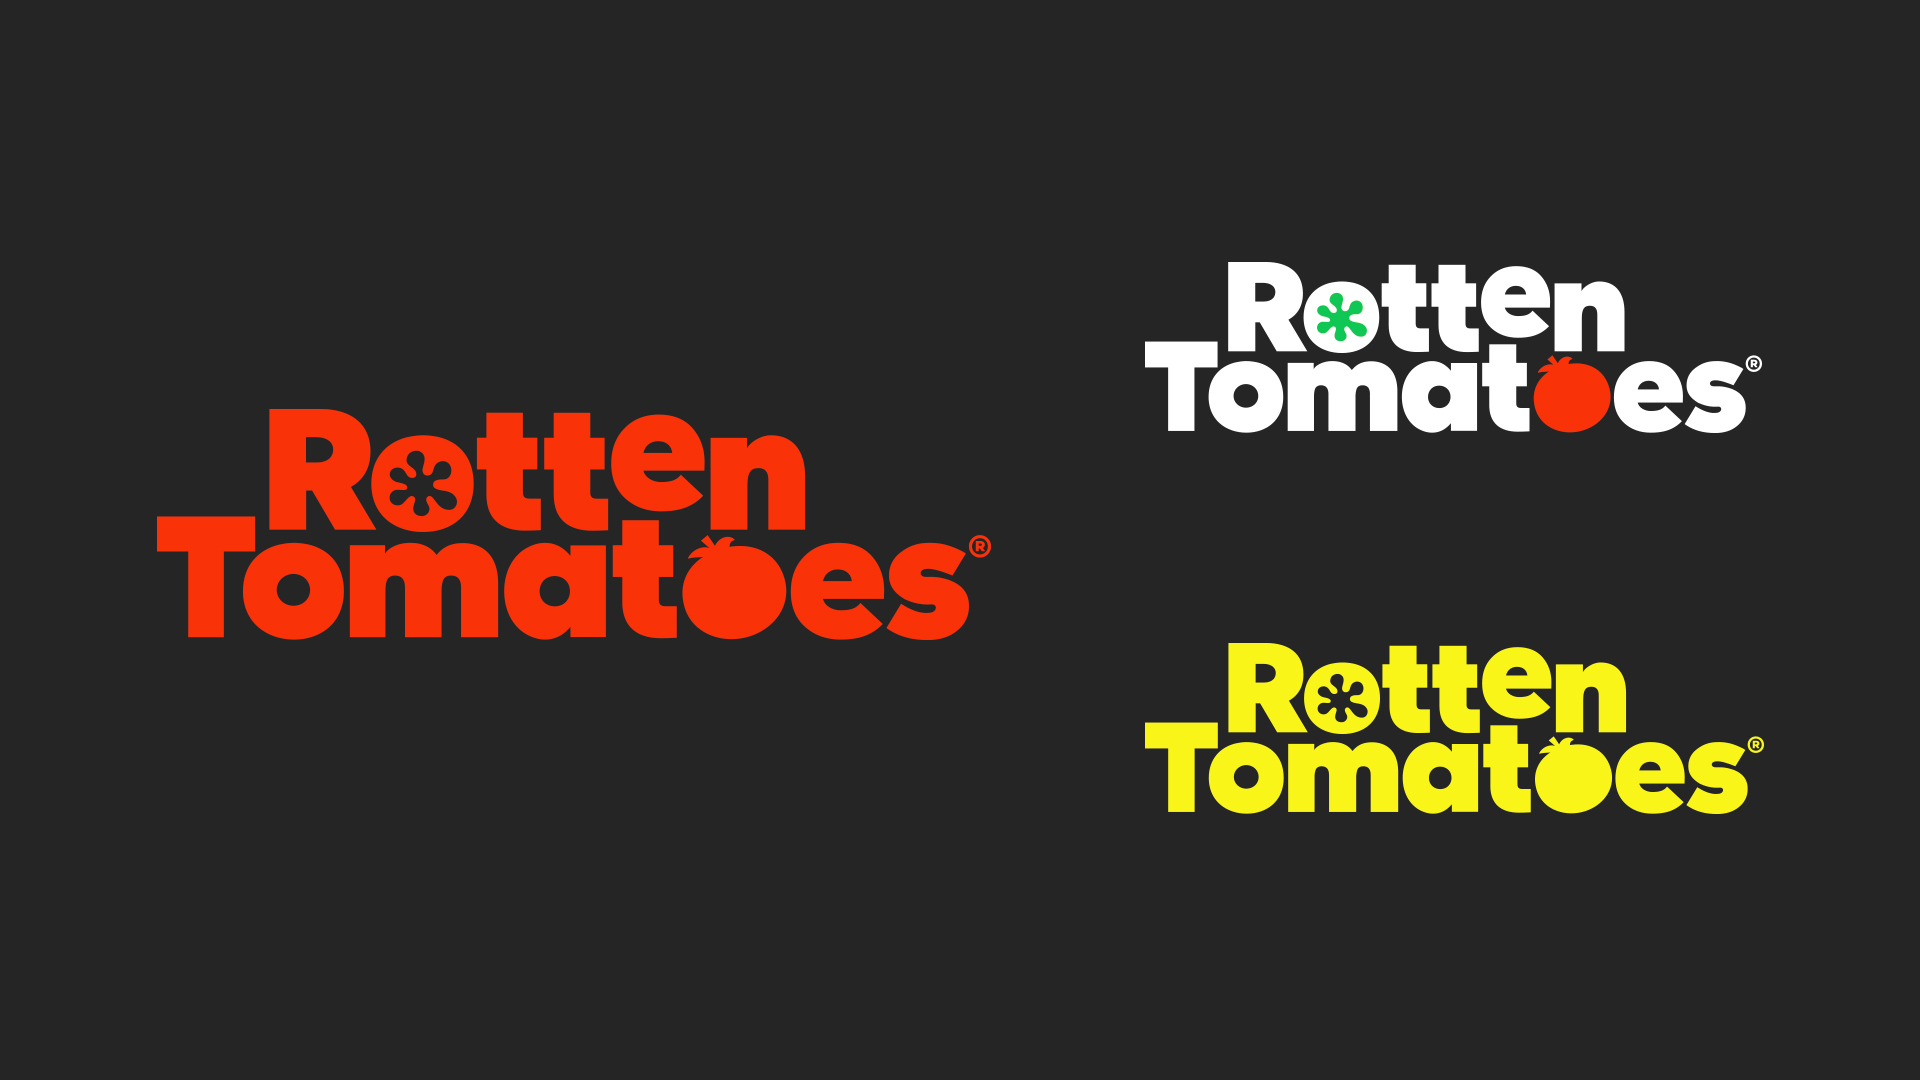 Inspiration: Rotten Tomatoes rolls out new visual identity.